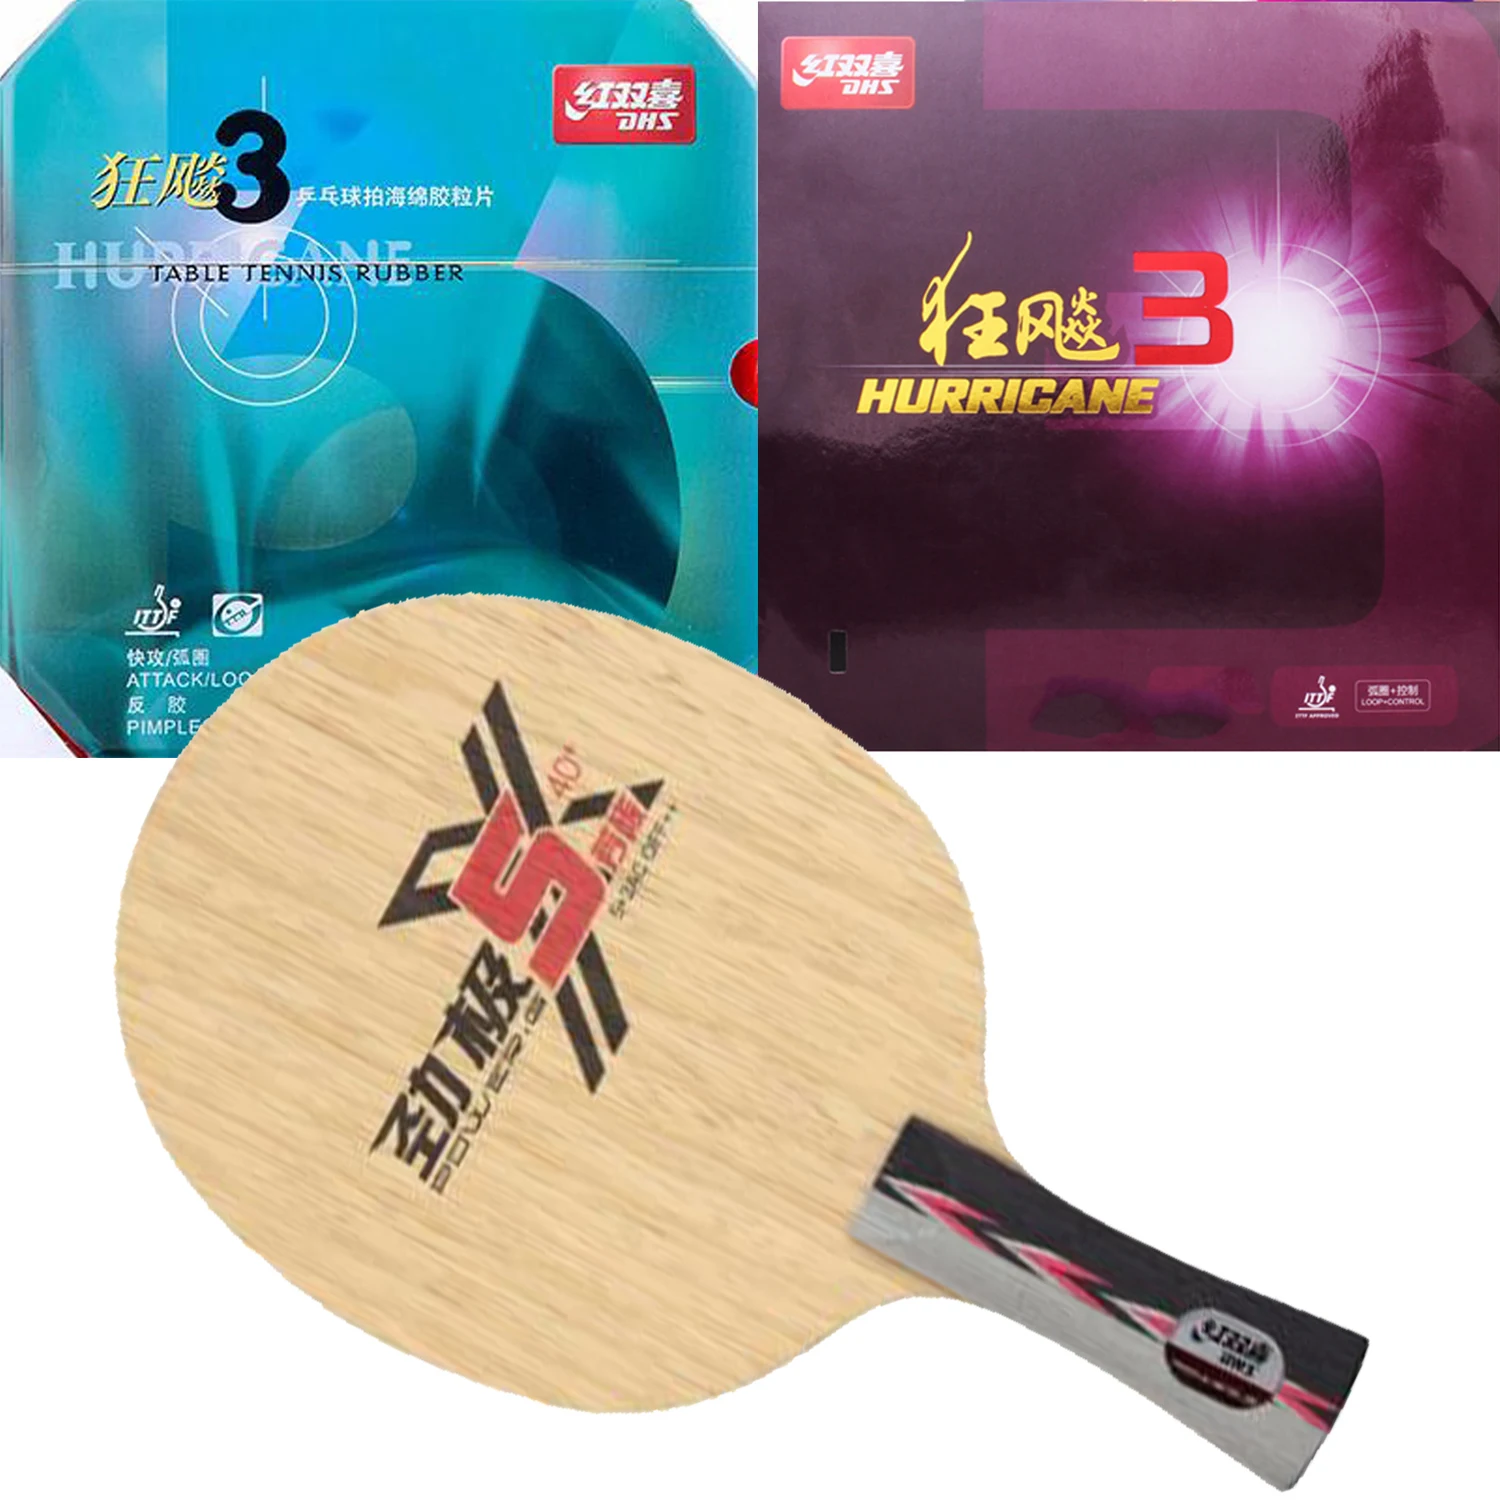 DHS New PG5X Table Tennis carbon Blade (5+2 Arylate Carbon) ALC With Neo hurricane3 Racket Ping Pong Bat